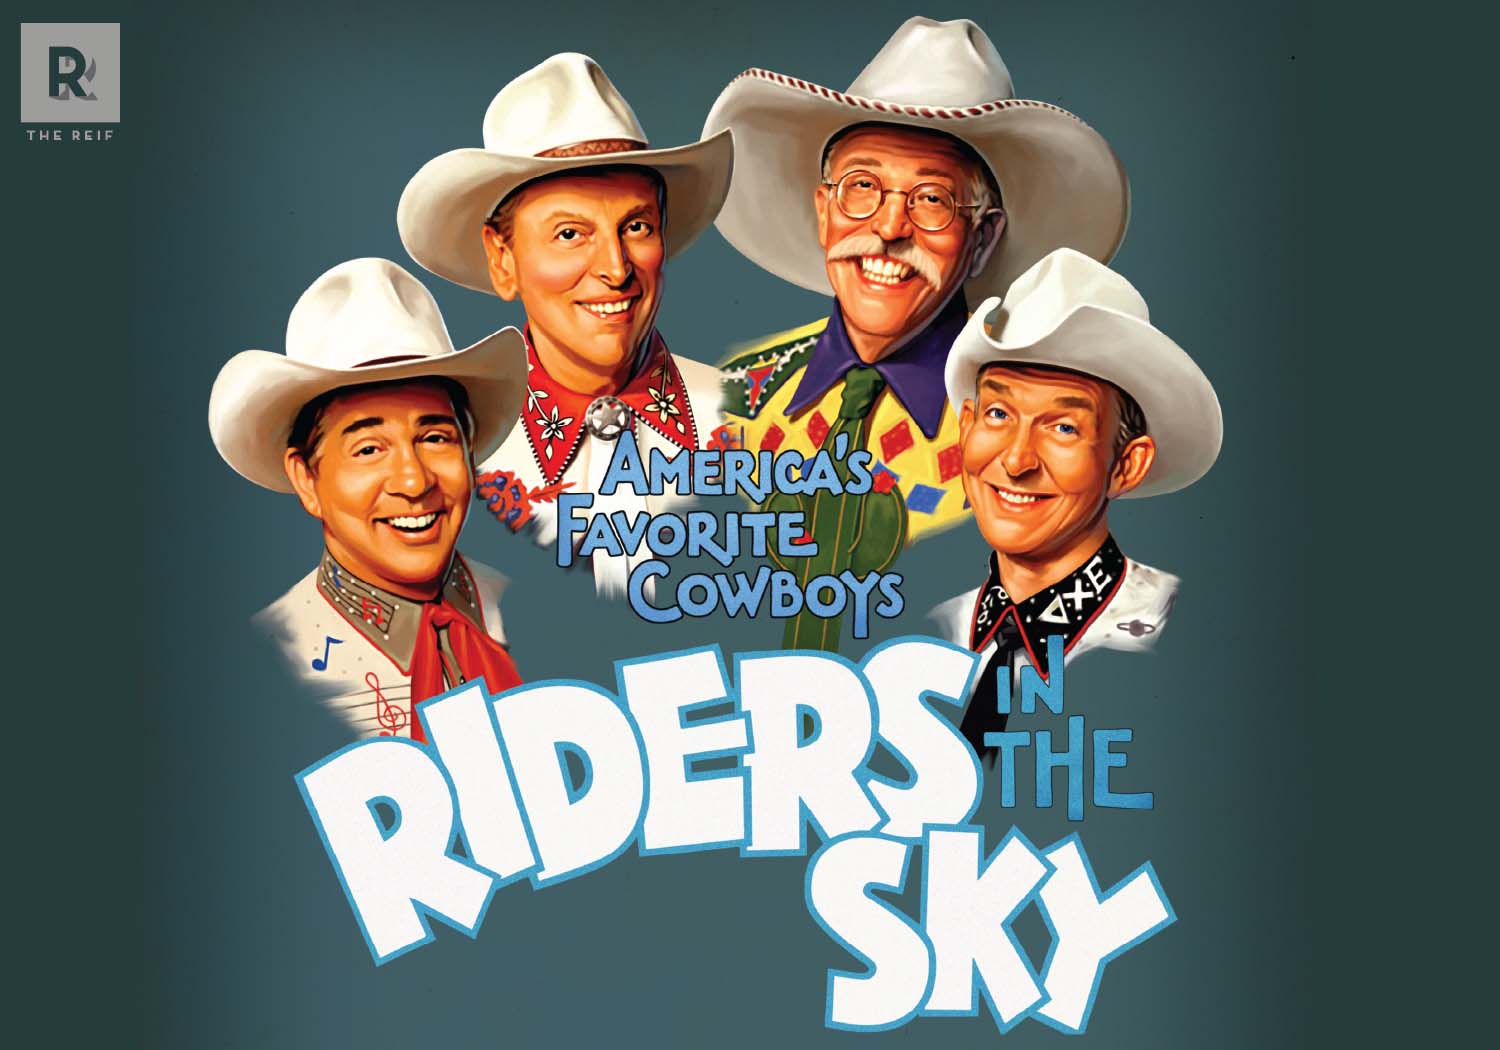 An Evening with Riders in the Sky